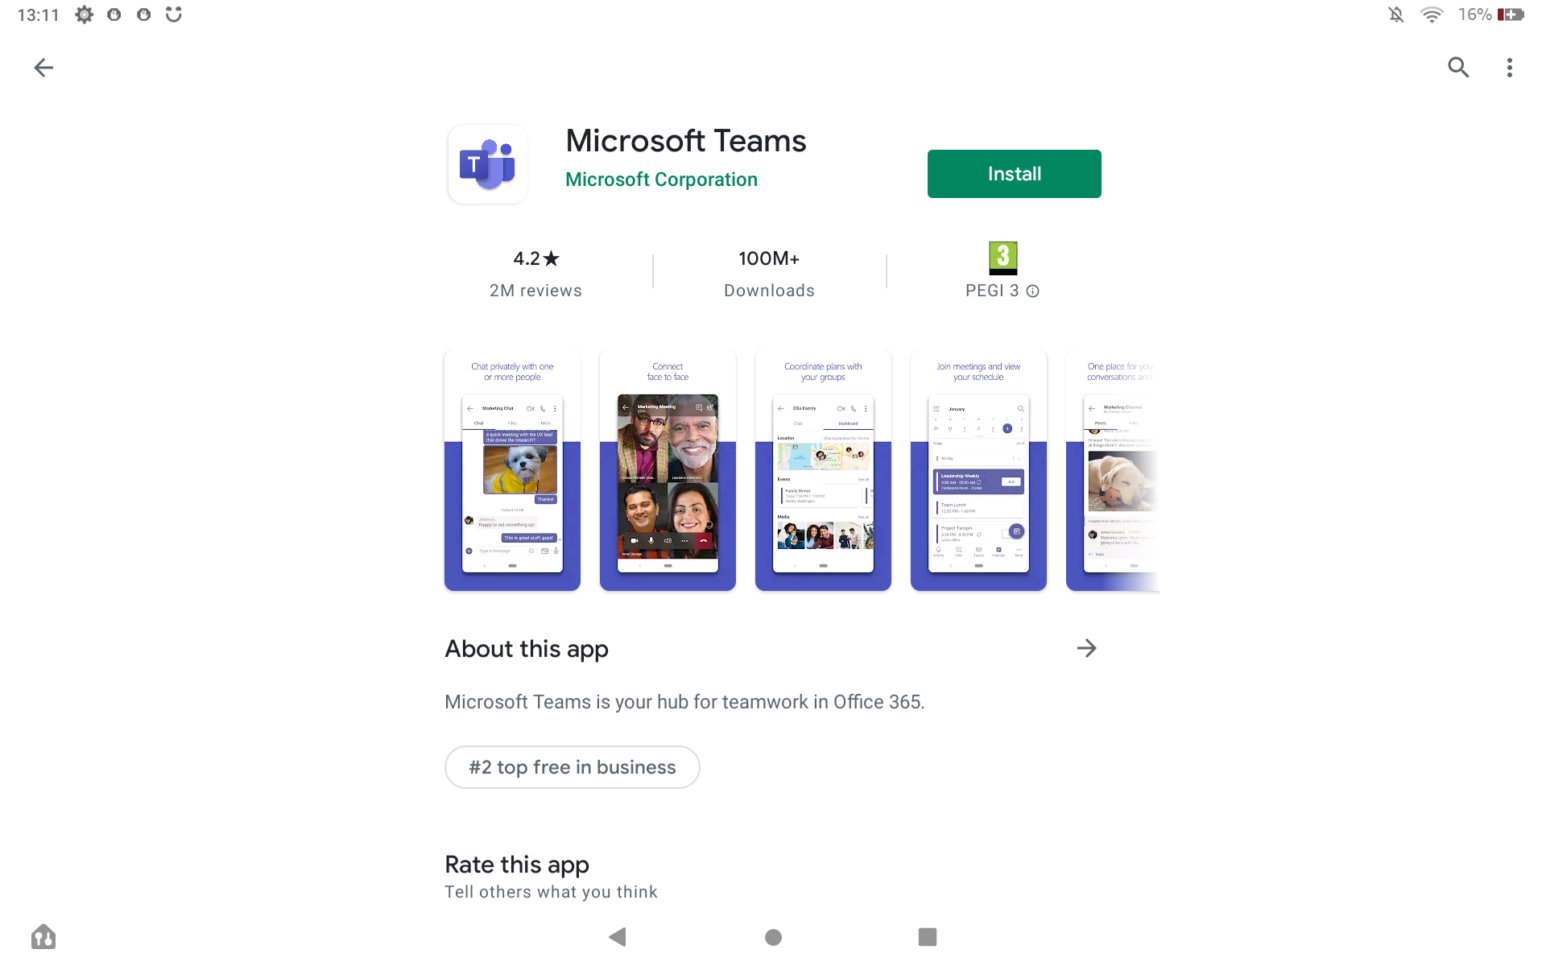 How To Install Microsoft Teams on an Amazon Fire Tablet